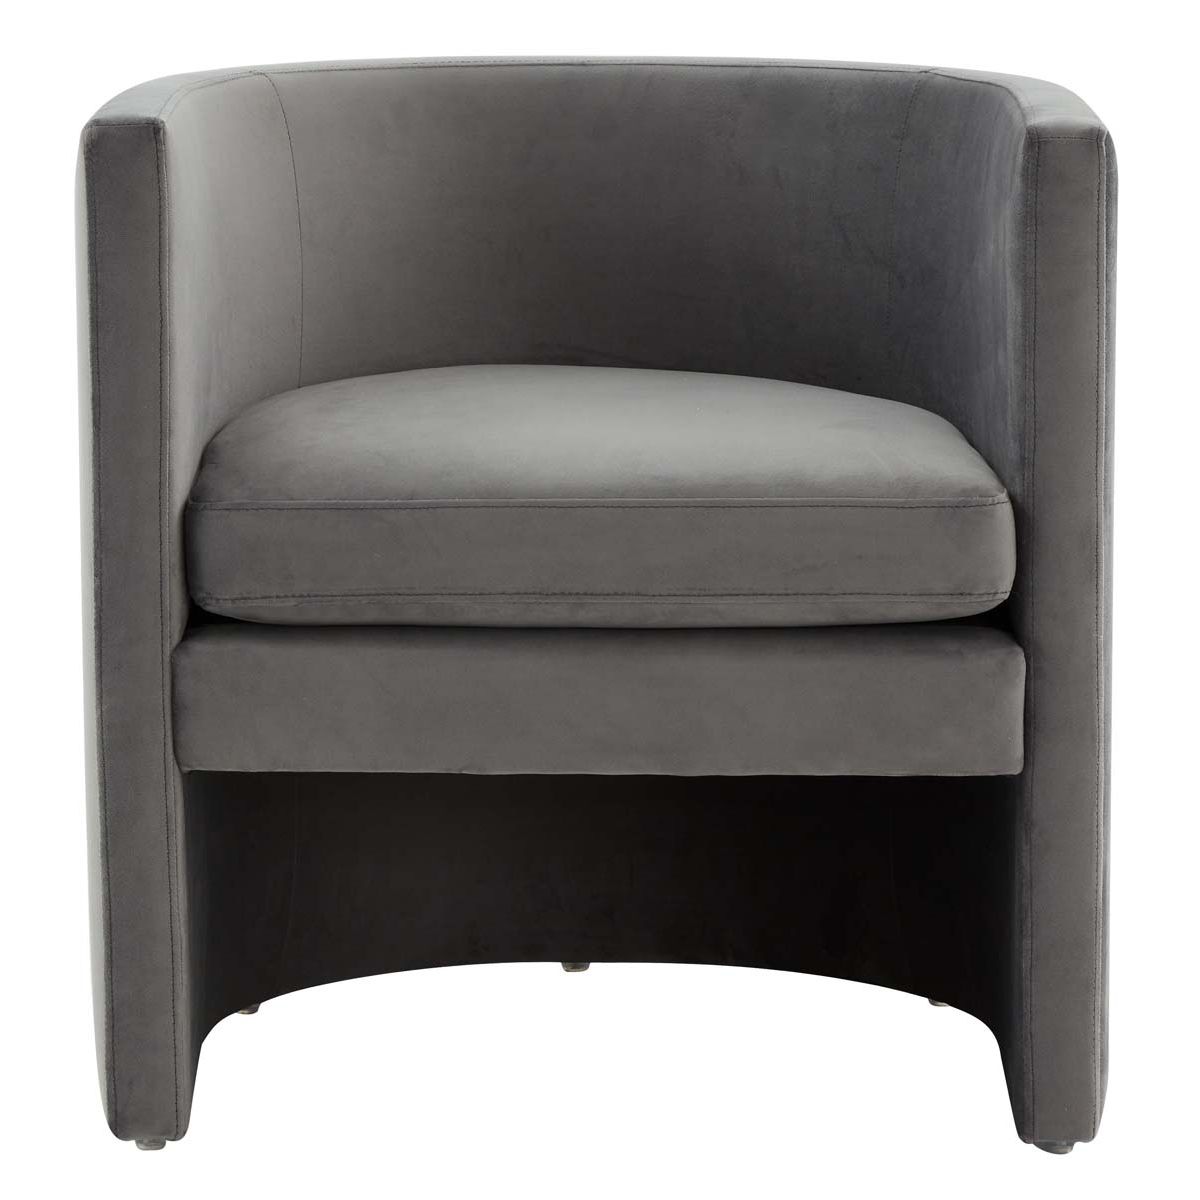 Safavieh Couture Rosabeth Curved Accent Chair